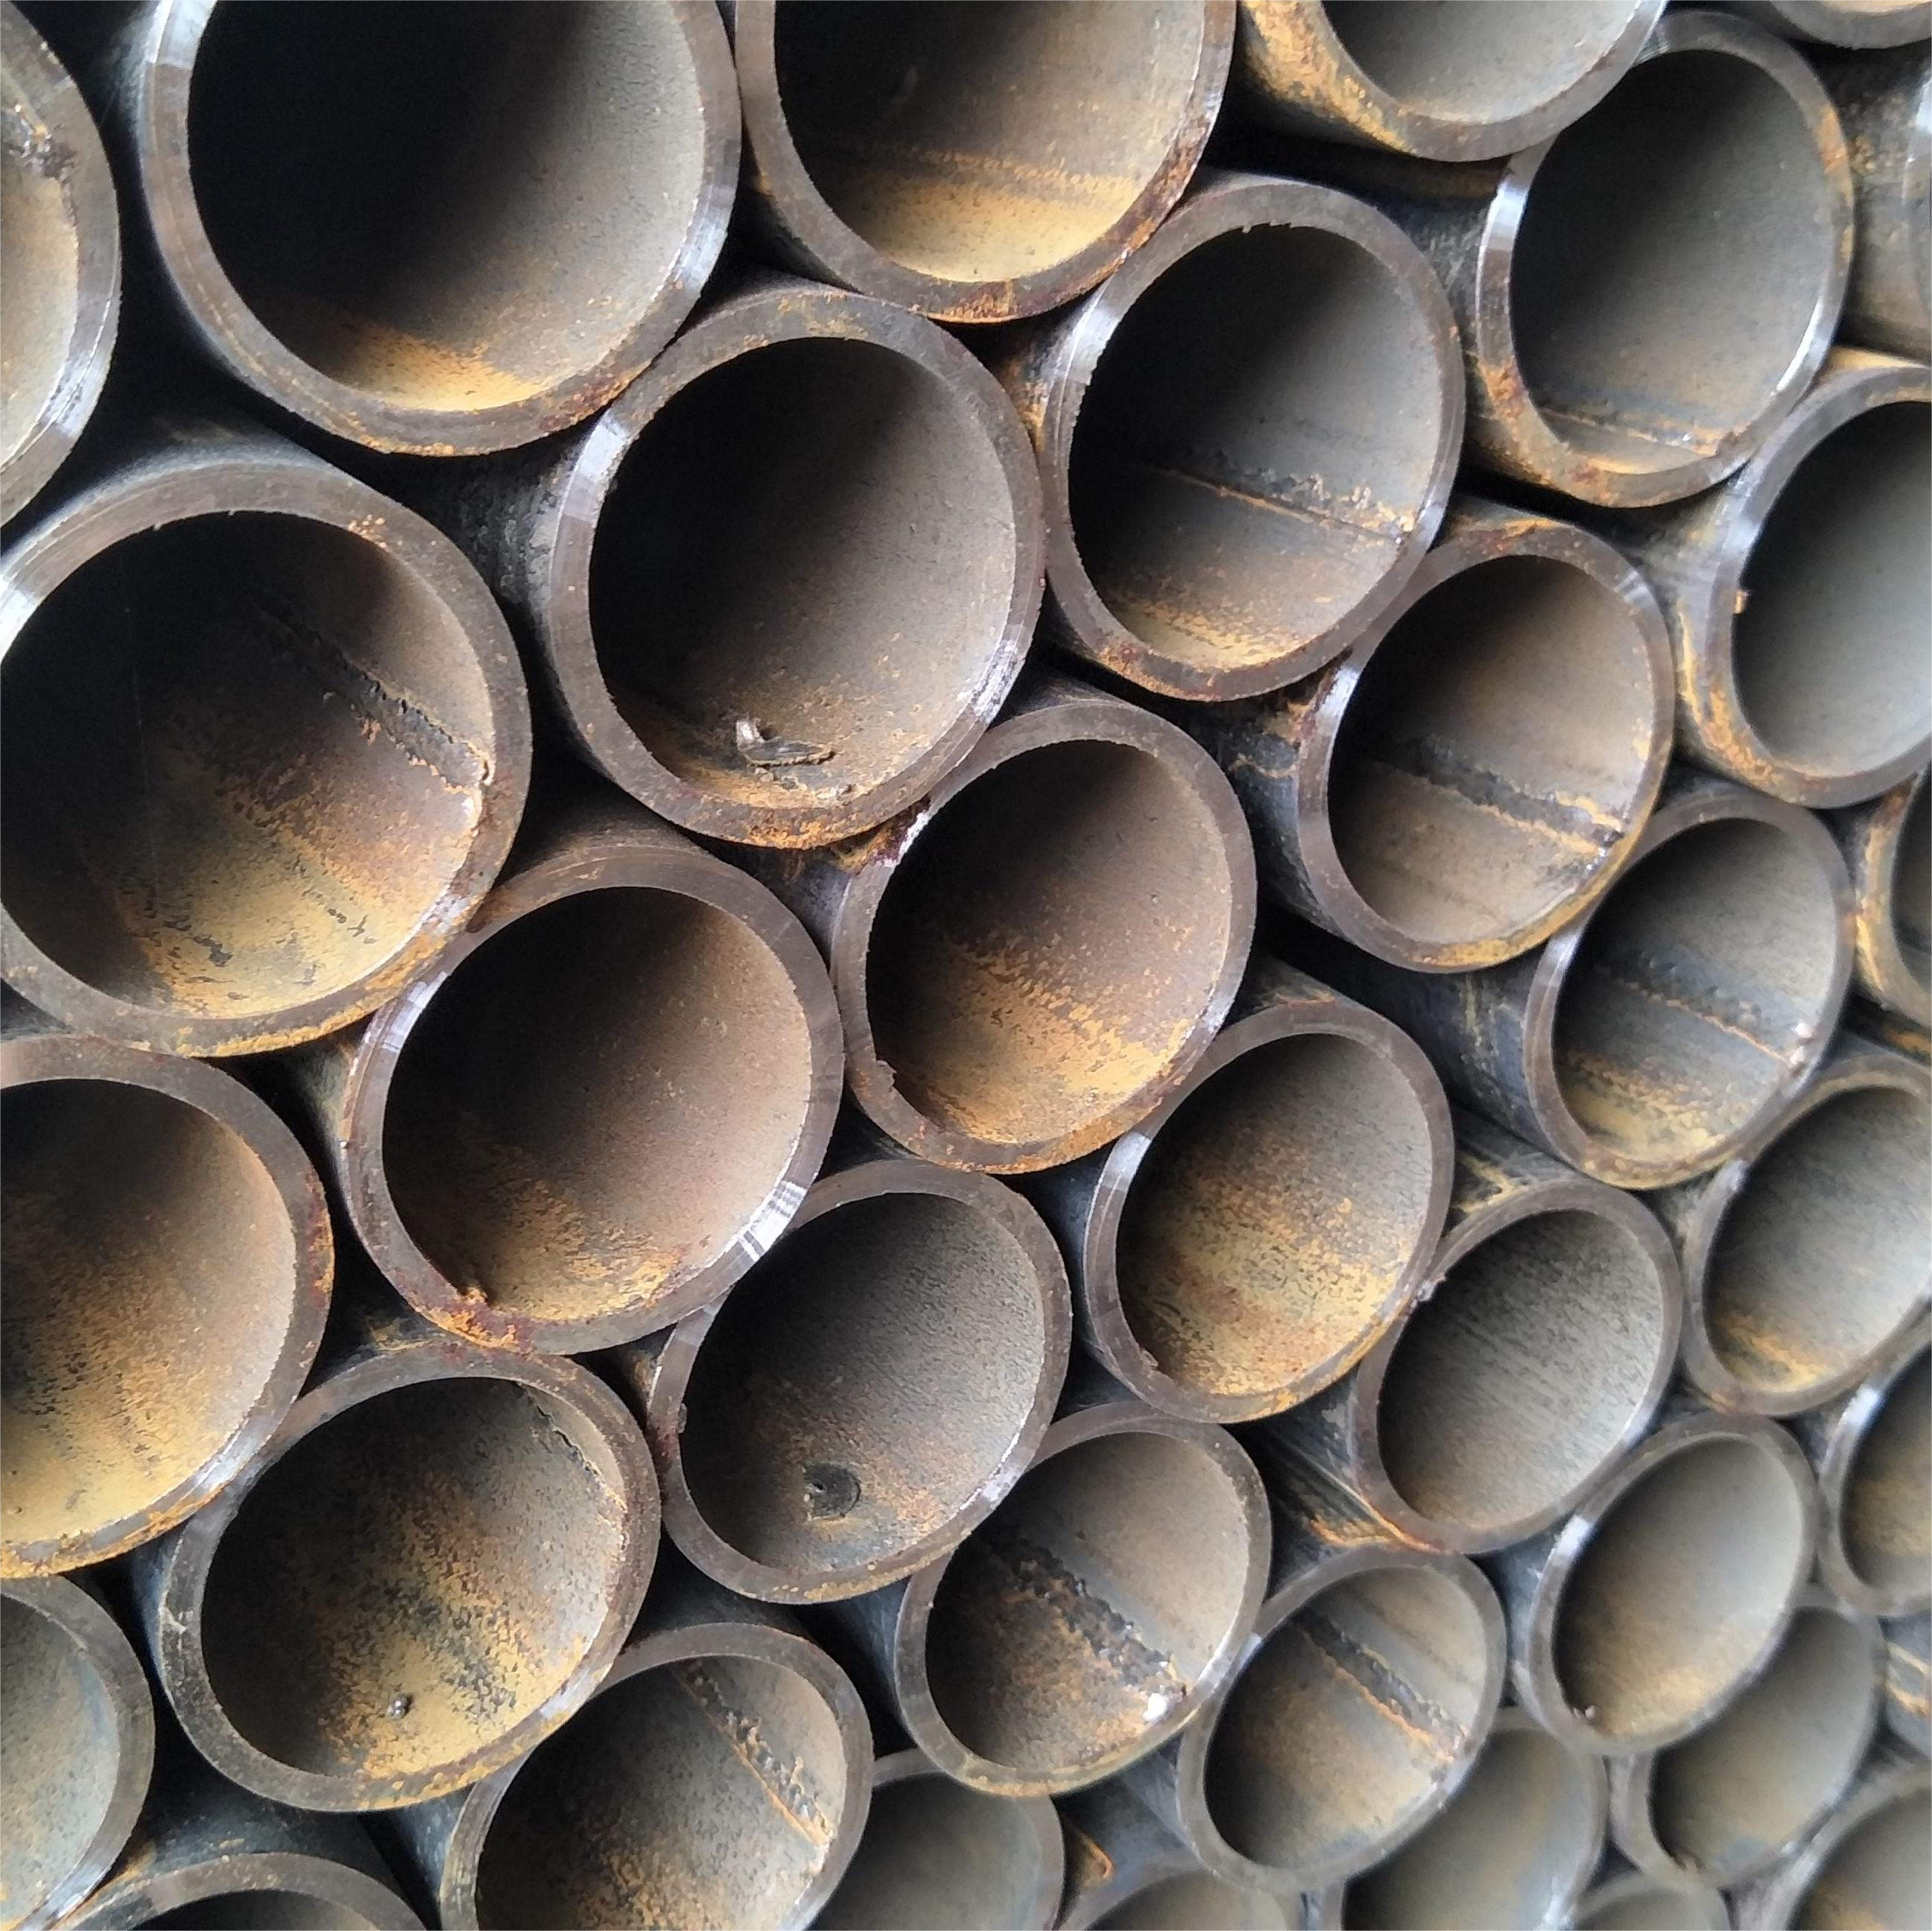 erw carbon steel pipe